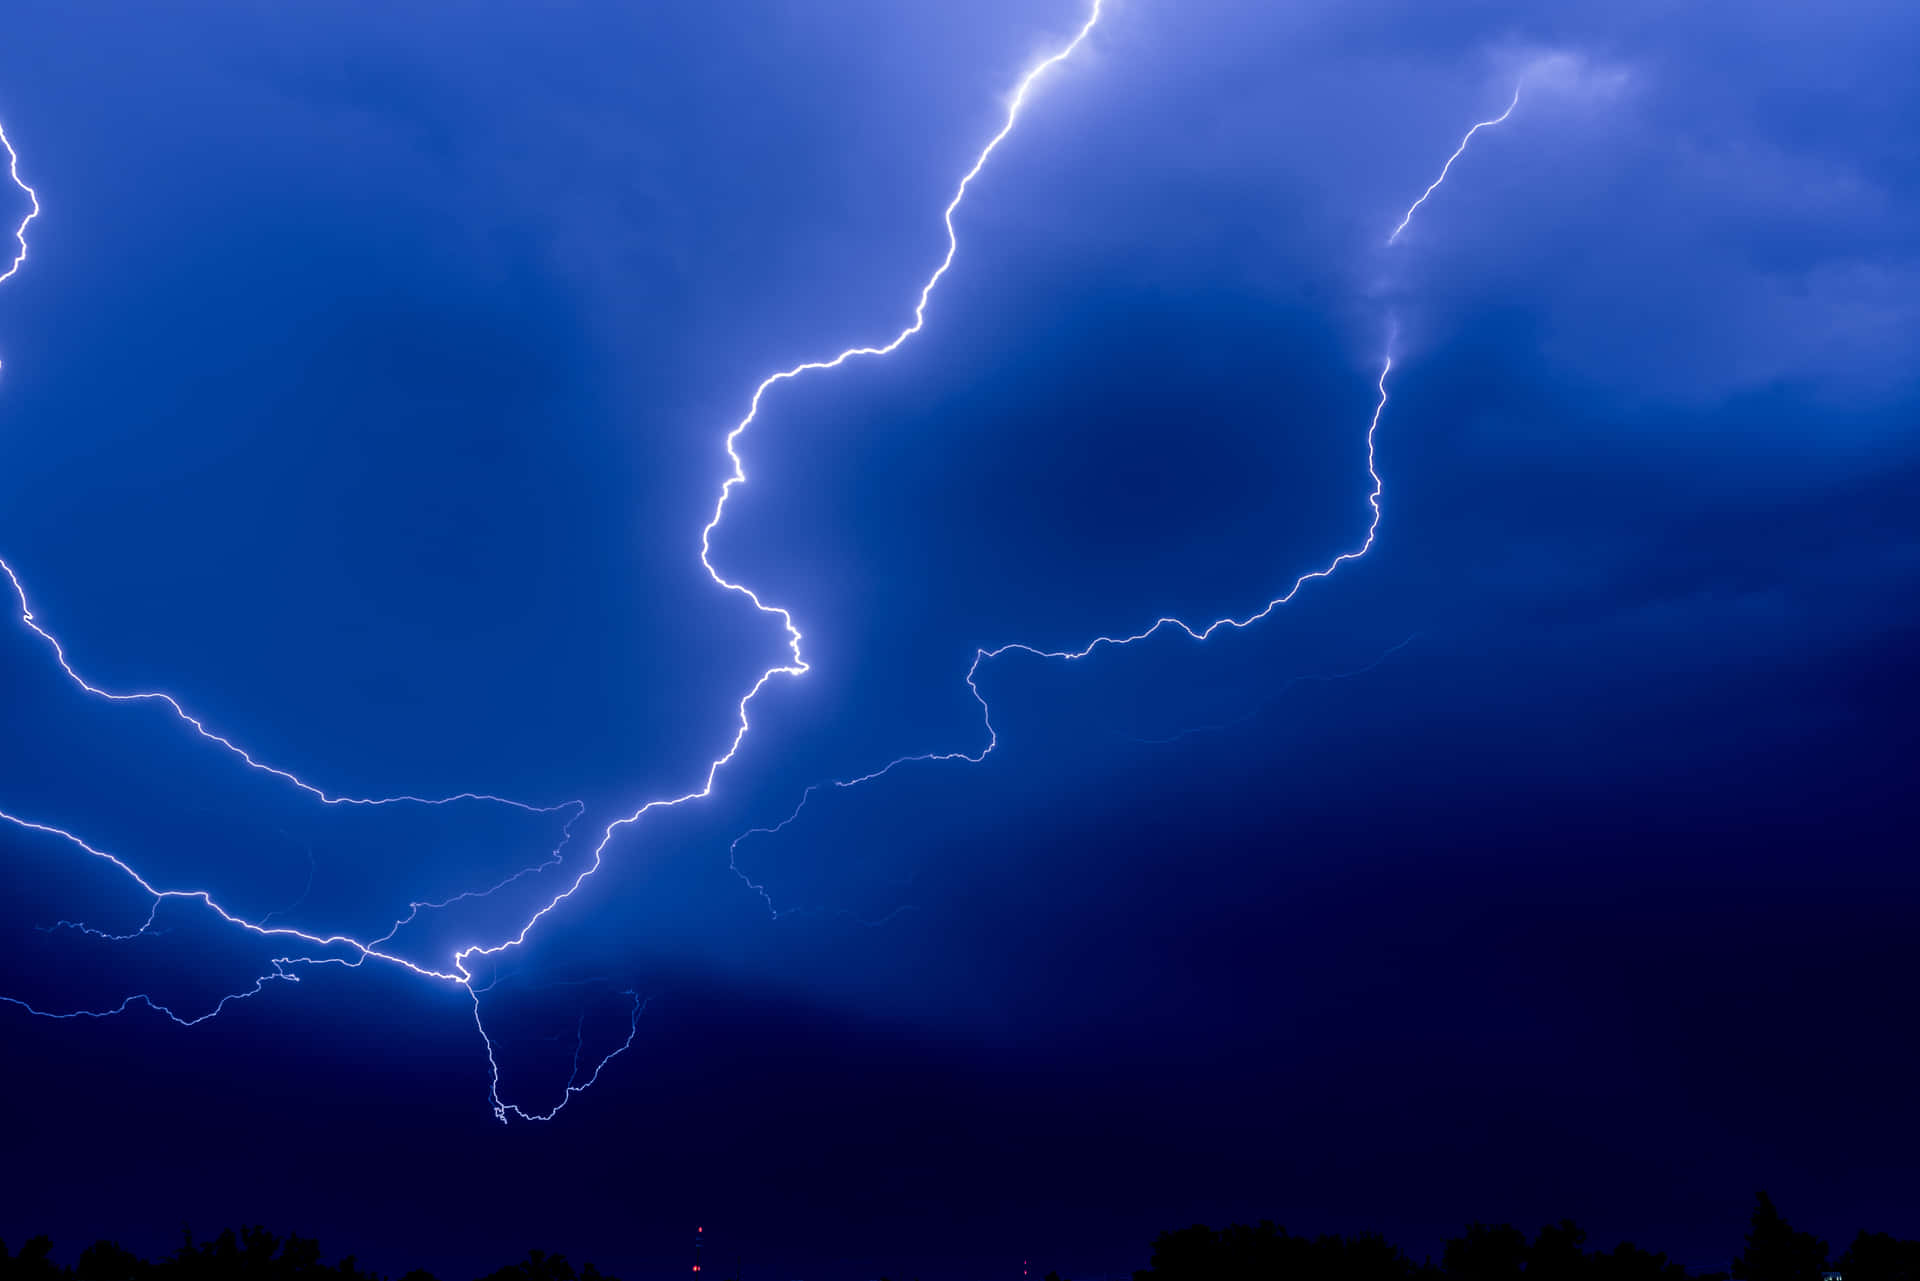 "A bolt of blue lightning flashes through the sky."